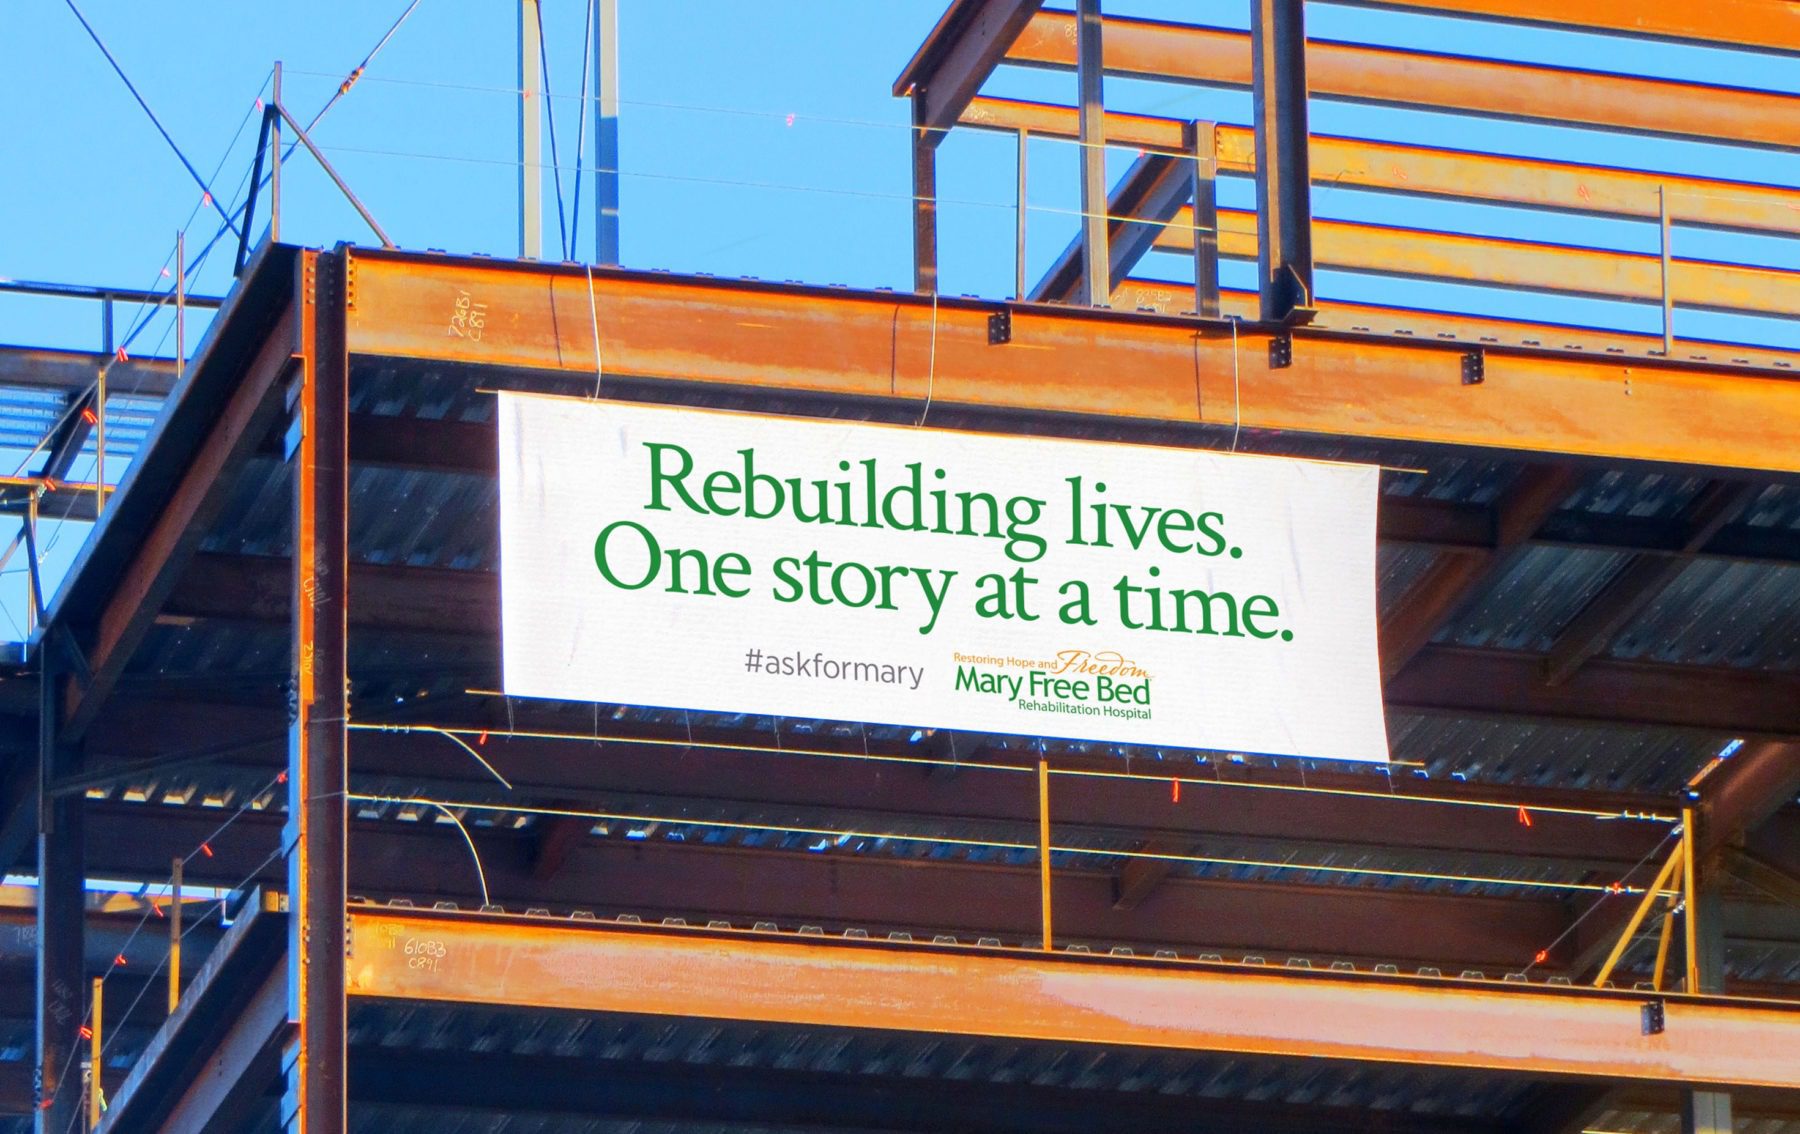 Construction banner with headline "Rebuilding lives. One story at a time."